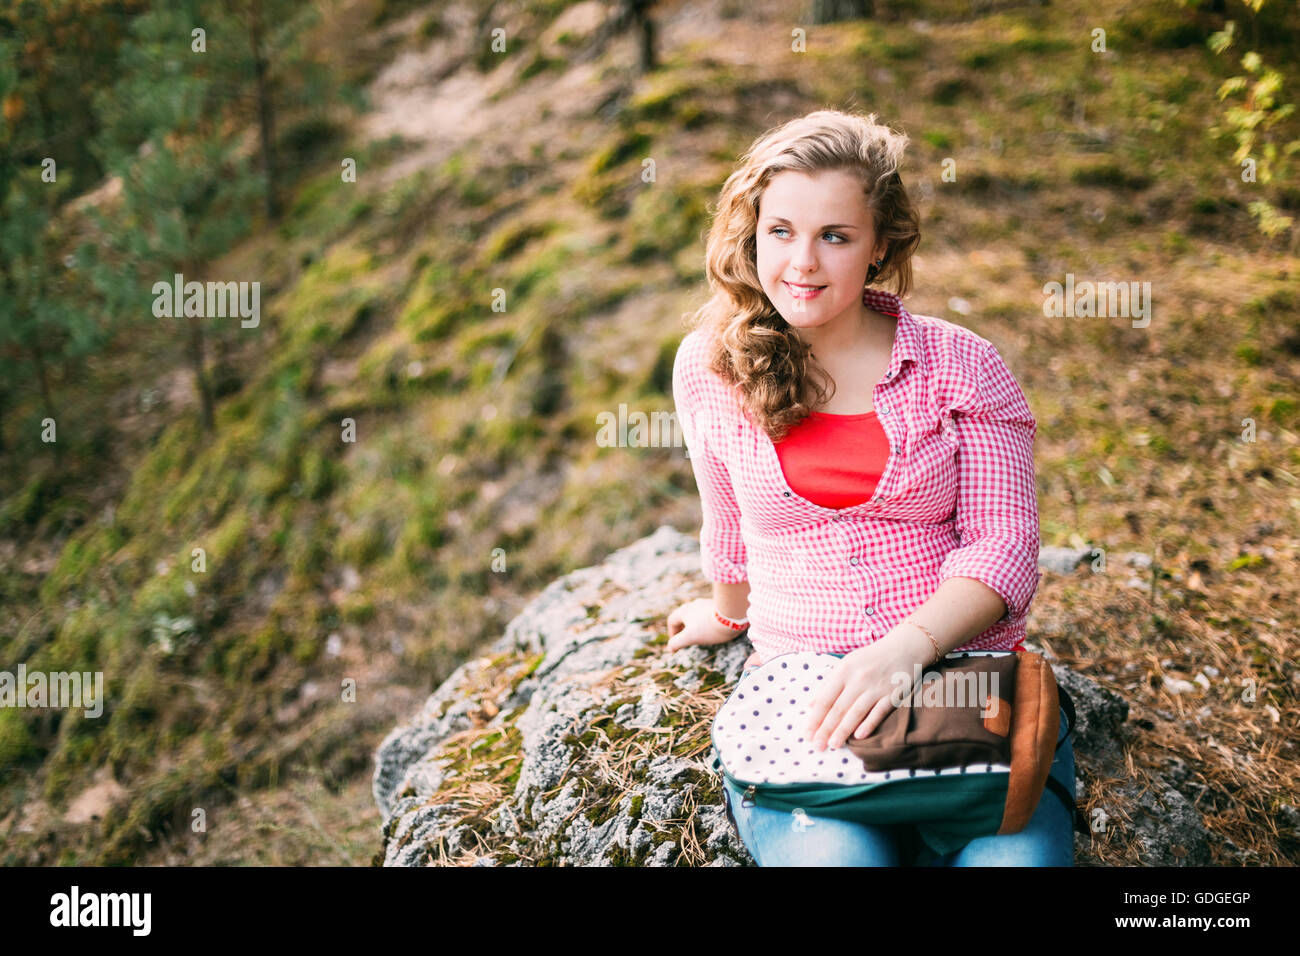 Beautiful Plus Size Young Smiling Woman In Pink Shirt Sitting on Stone in Summer Forest Stock Photo